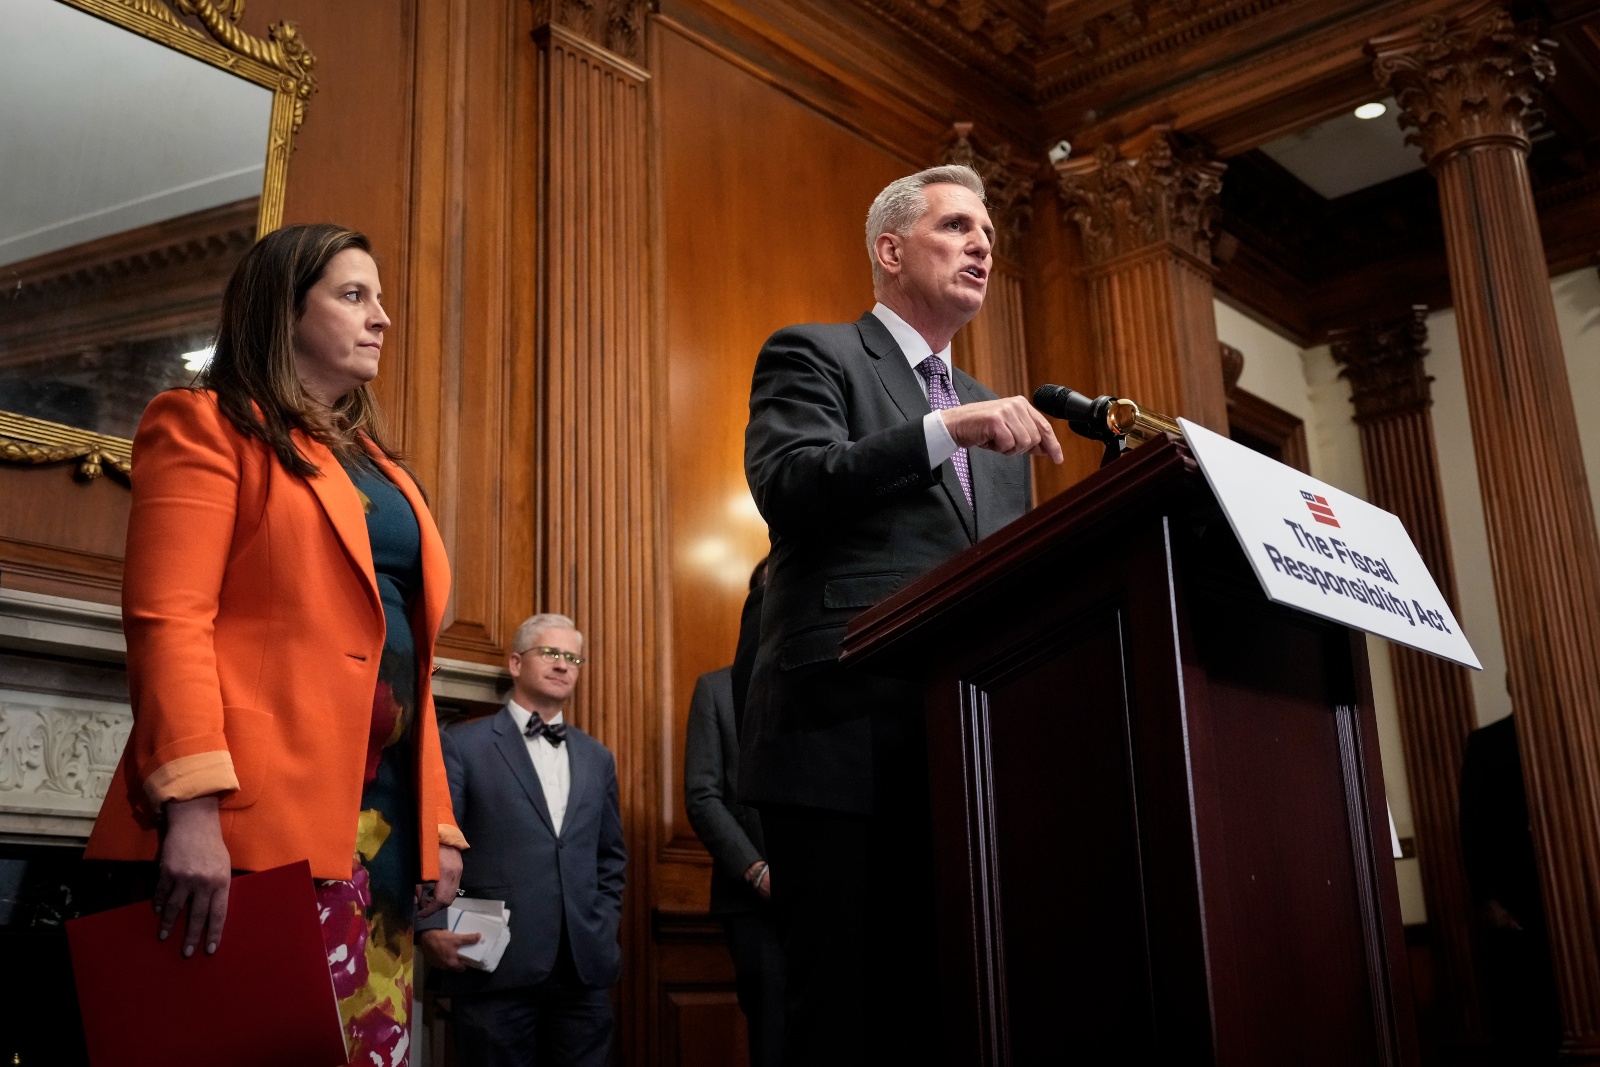 Speaker of the House Kevin McCarthy (R-CA) speaks at a news conference in Washington, D.C., after the House passed the Fiscal Responsibility Act to raise the debt ceiling on May 31, 2023.